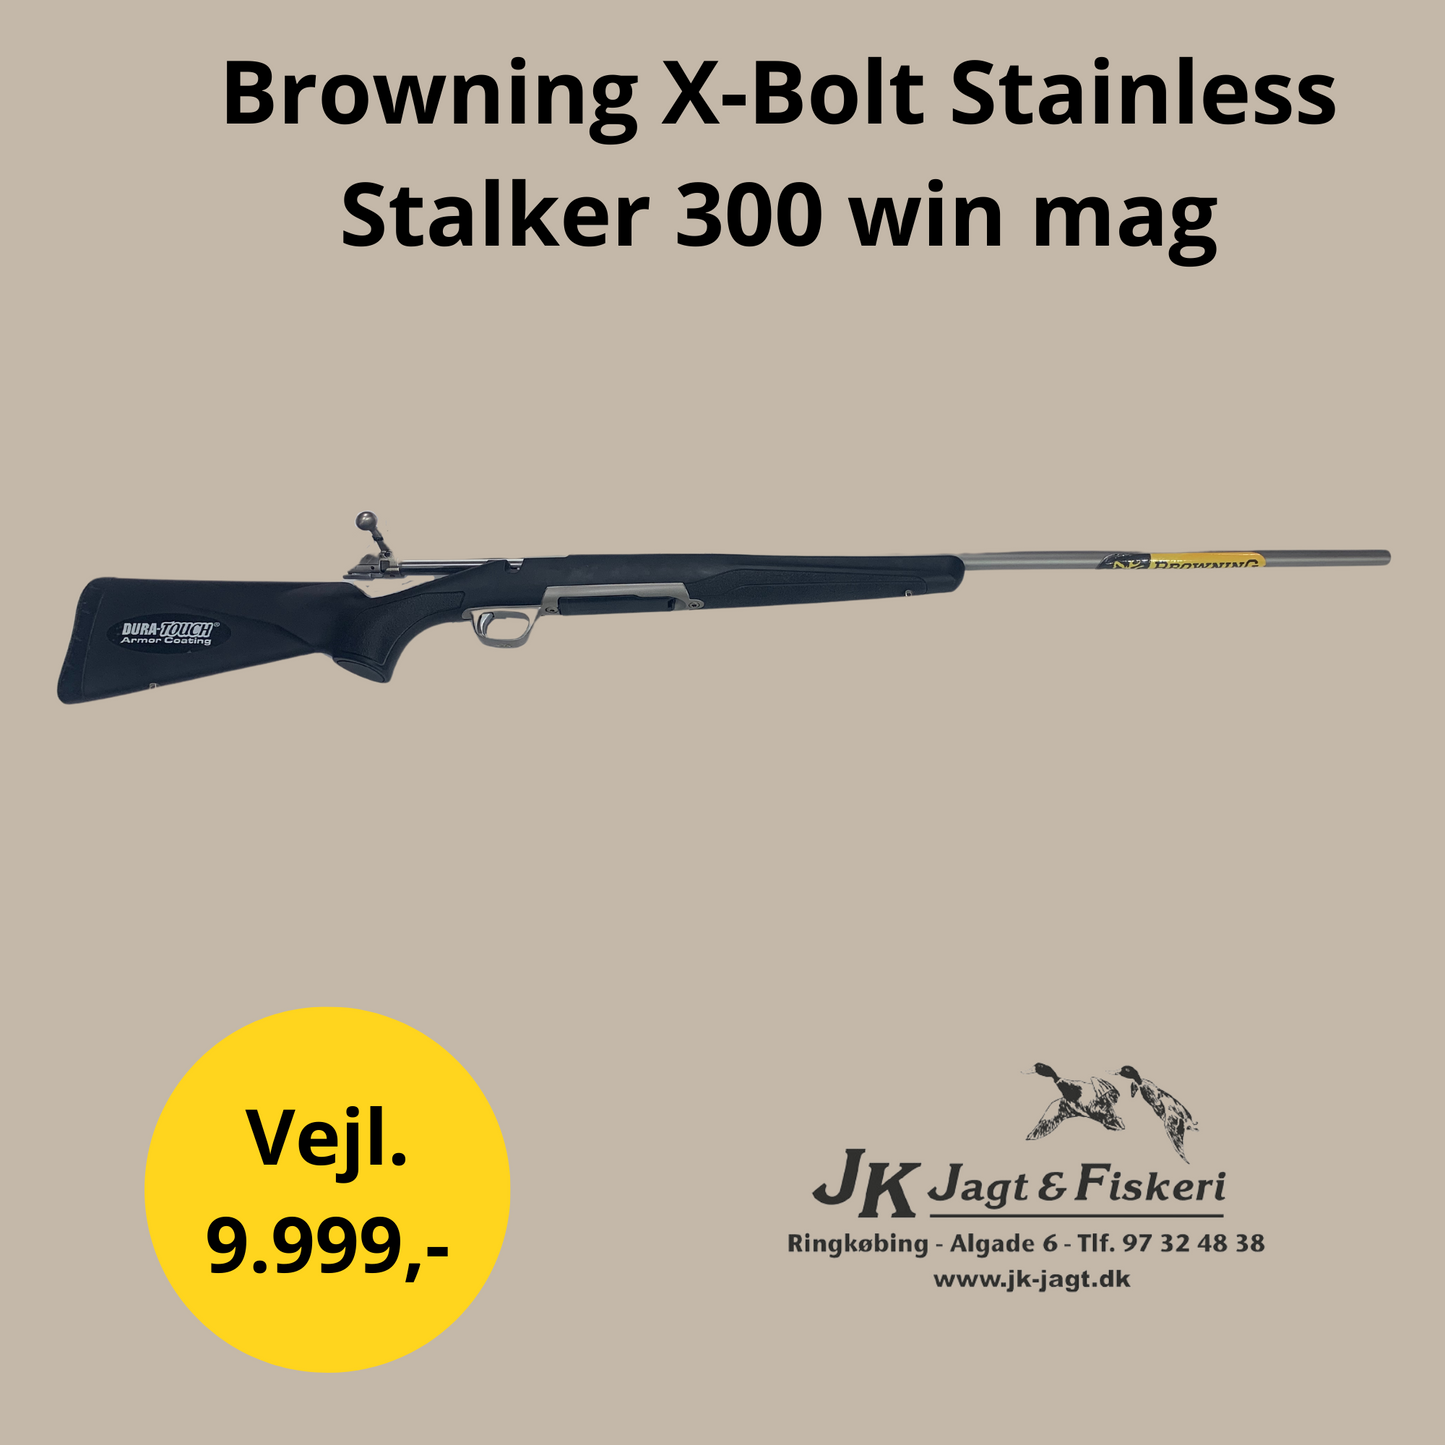 Browning X-Bolt Stainless Stalker 300 win mag